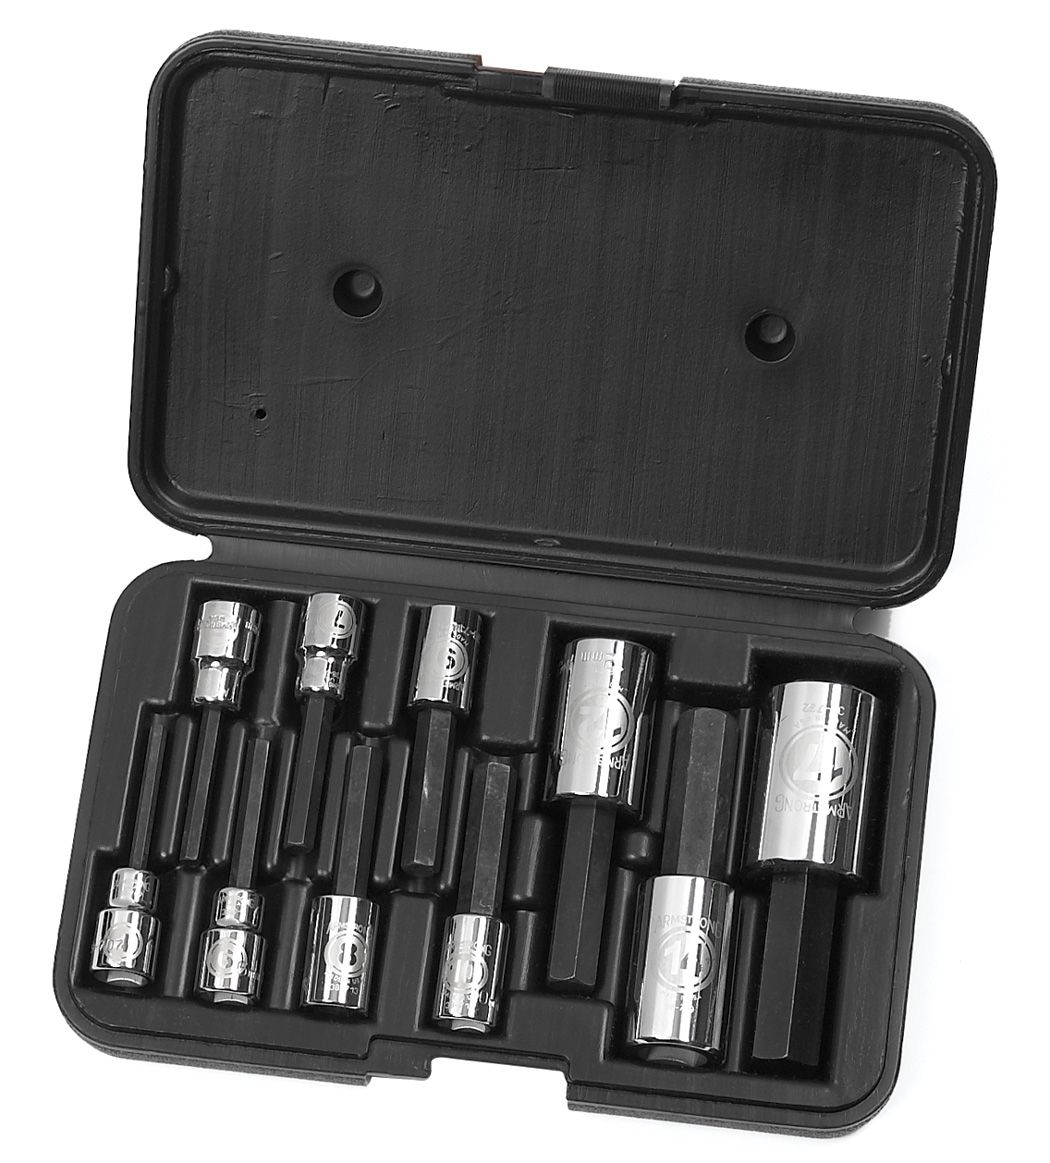 10 pc. 3/8 in.and 1/2 in. Hex Driver Socket Set in Blow Molded Case 16-697